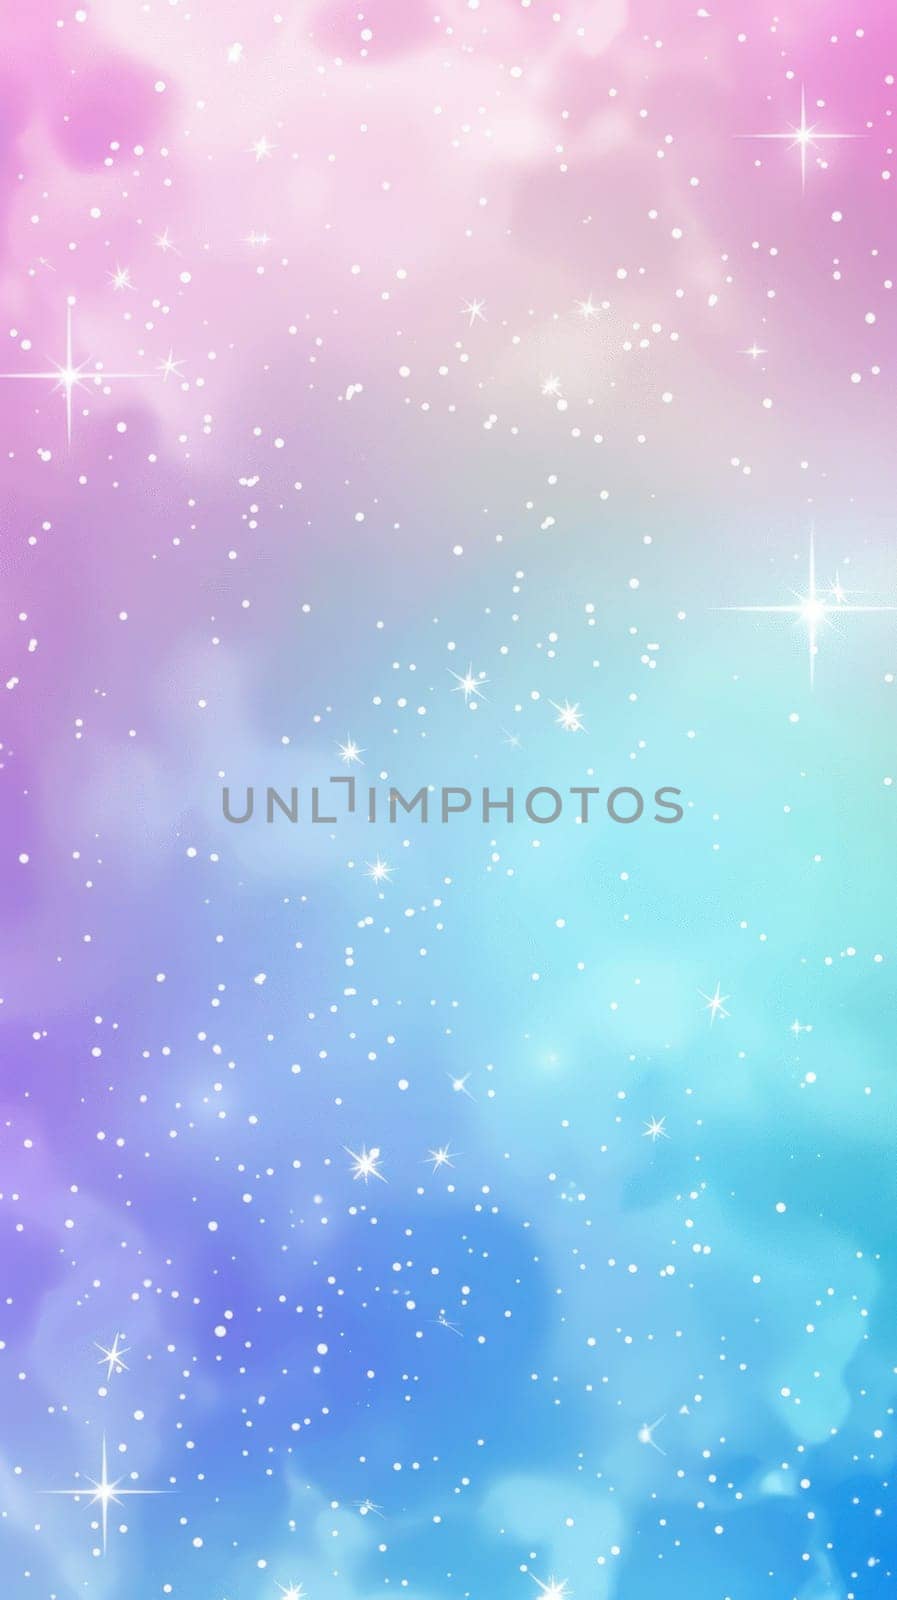 A colorful background with stars and a blue and pink swirl by golfmerrymaker